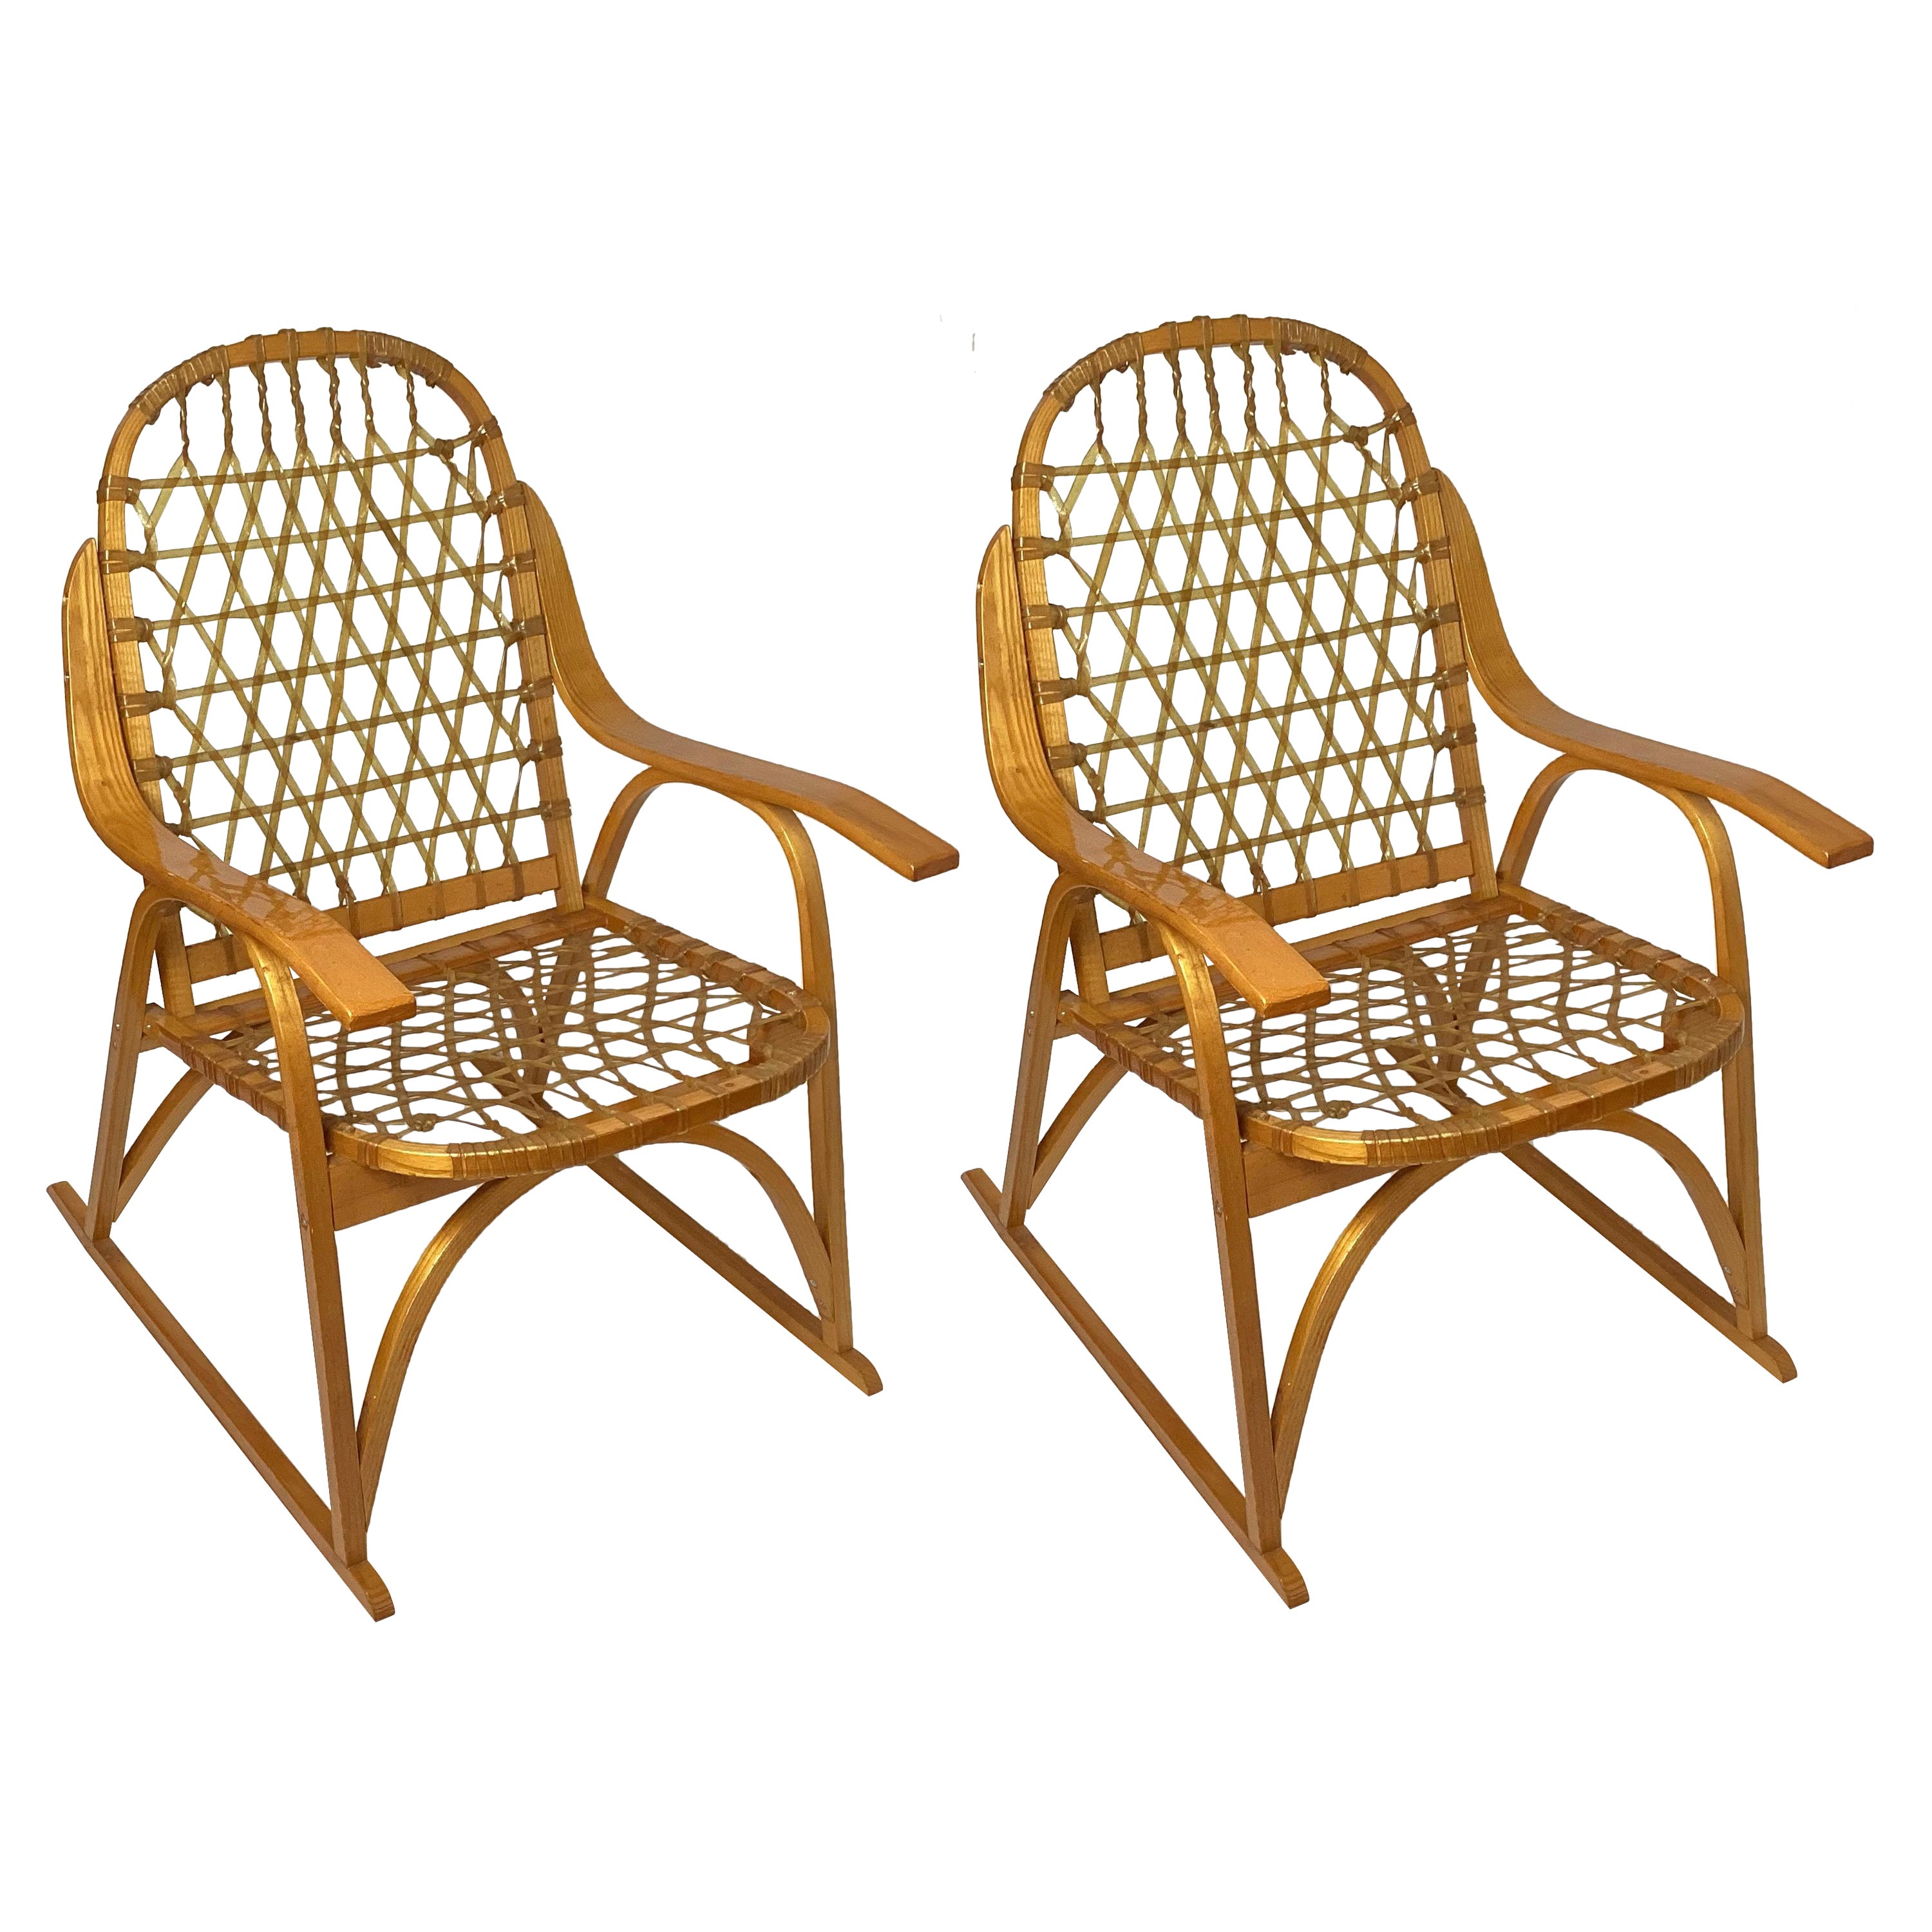 Vintage Snowshoe Arm Chairs by SnoCraft, Norway Maine